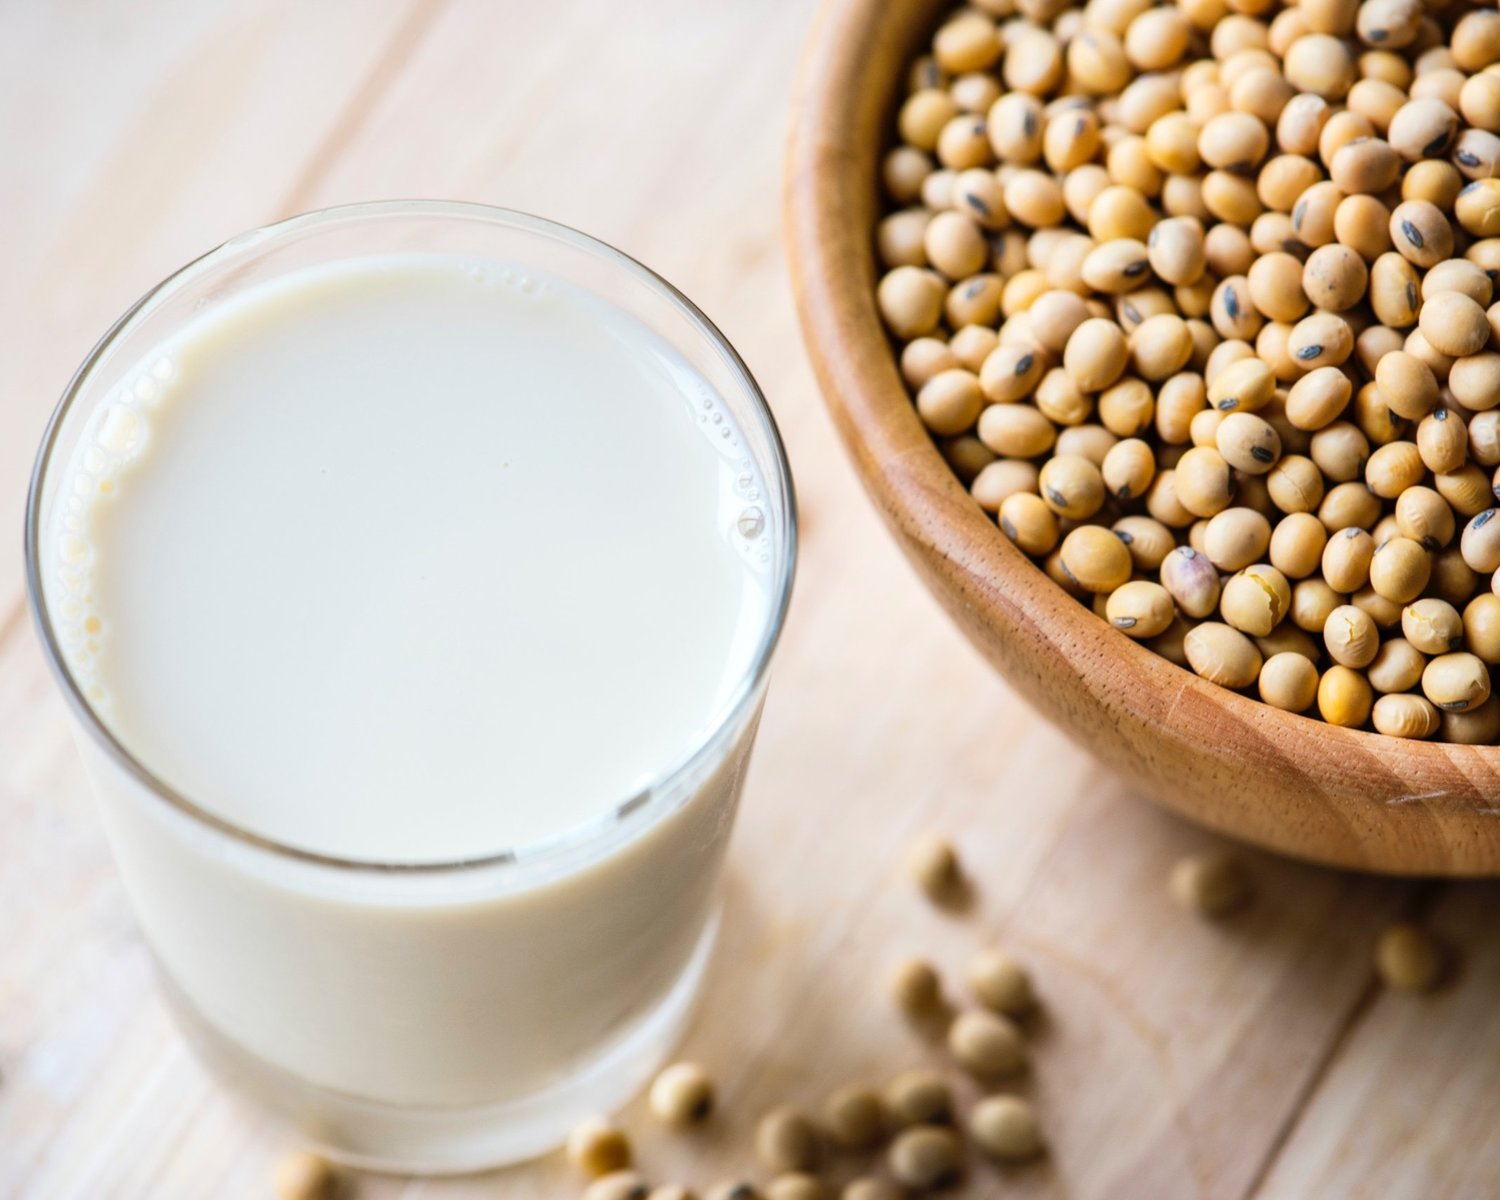 Fun fact: soymilk is said to be invented in China over 2,000 years ago!